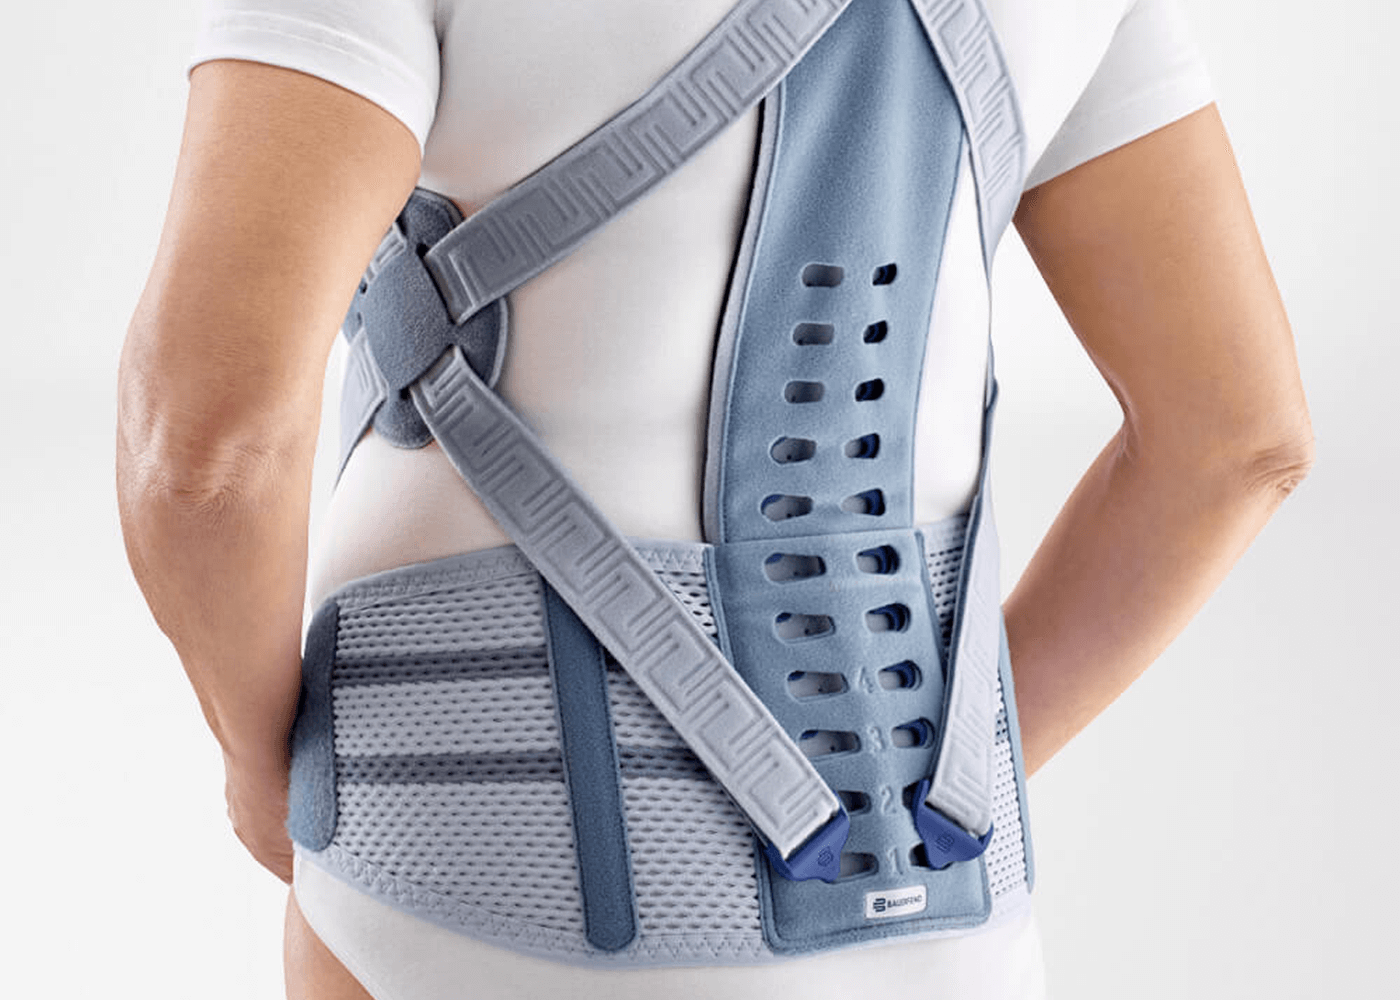 Guide to wearing your Thoracolumbar Spinal Brace Brace